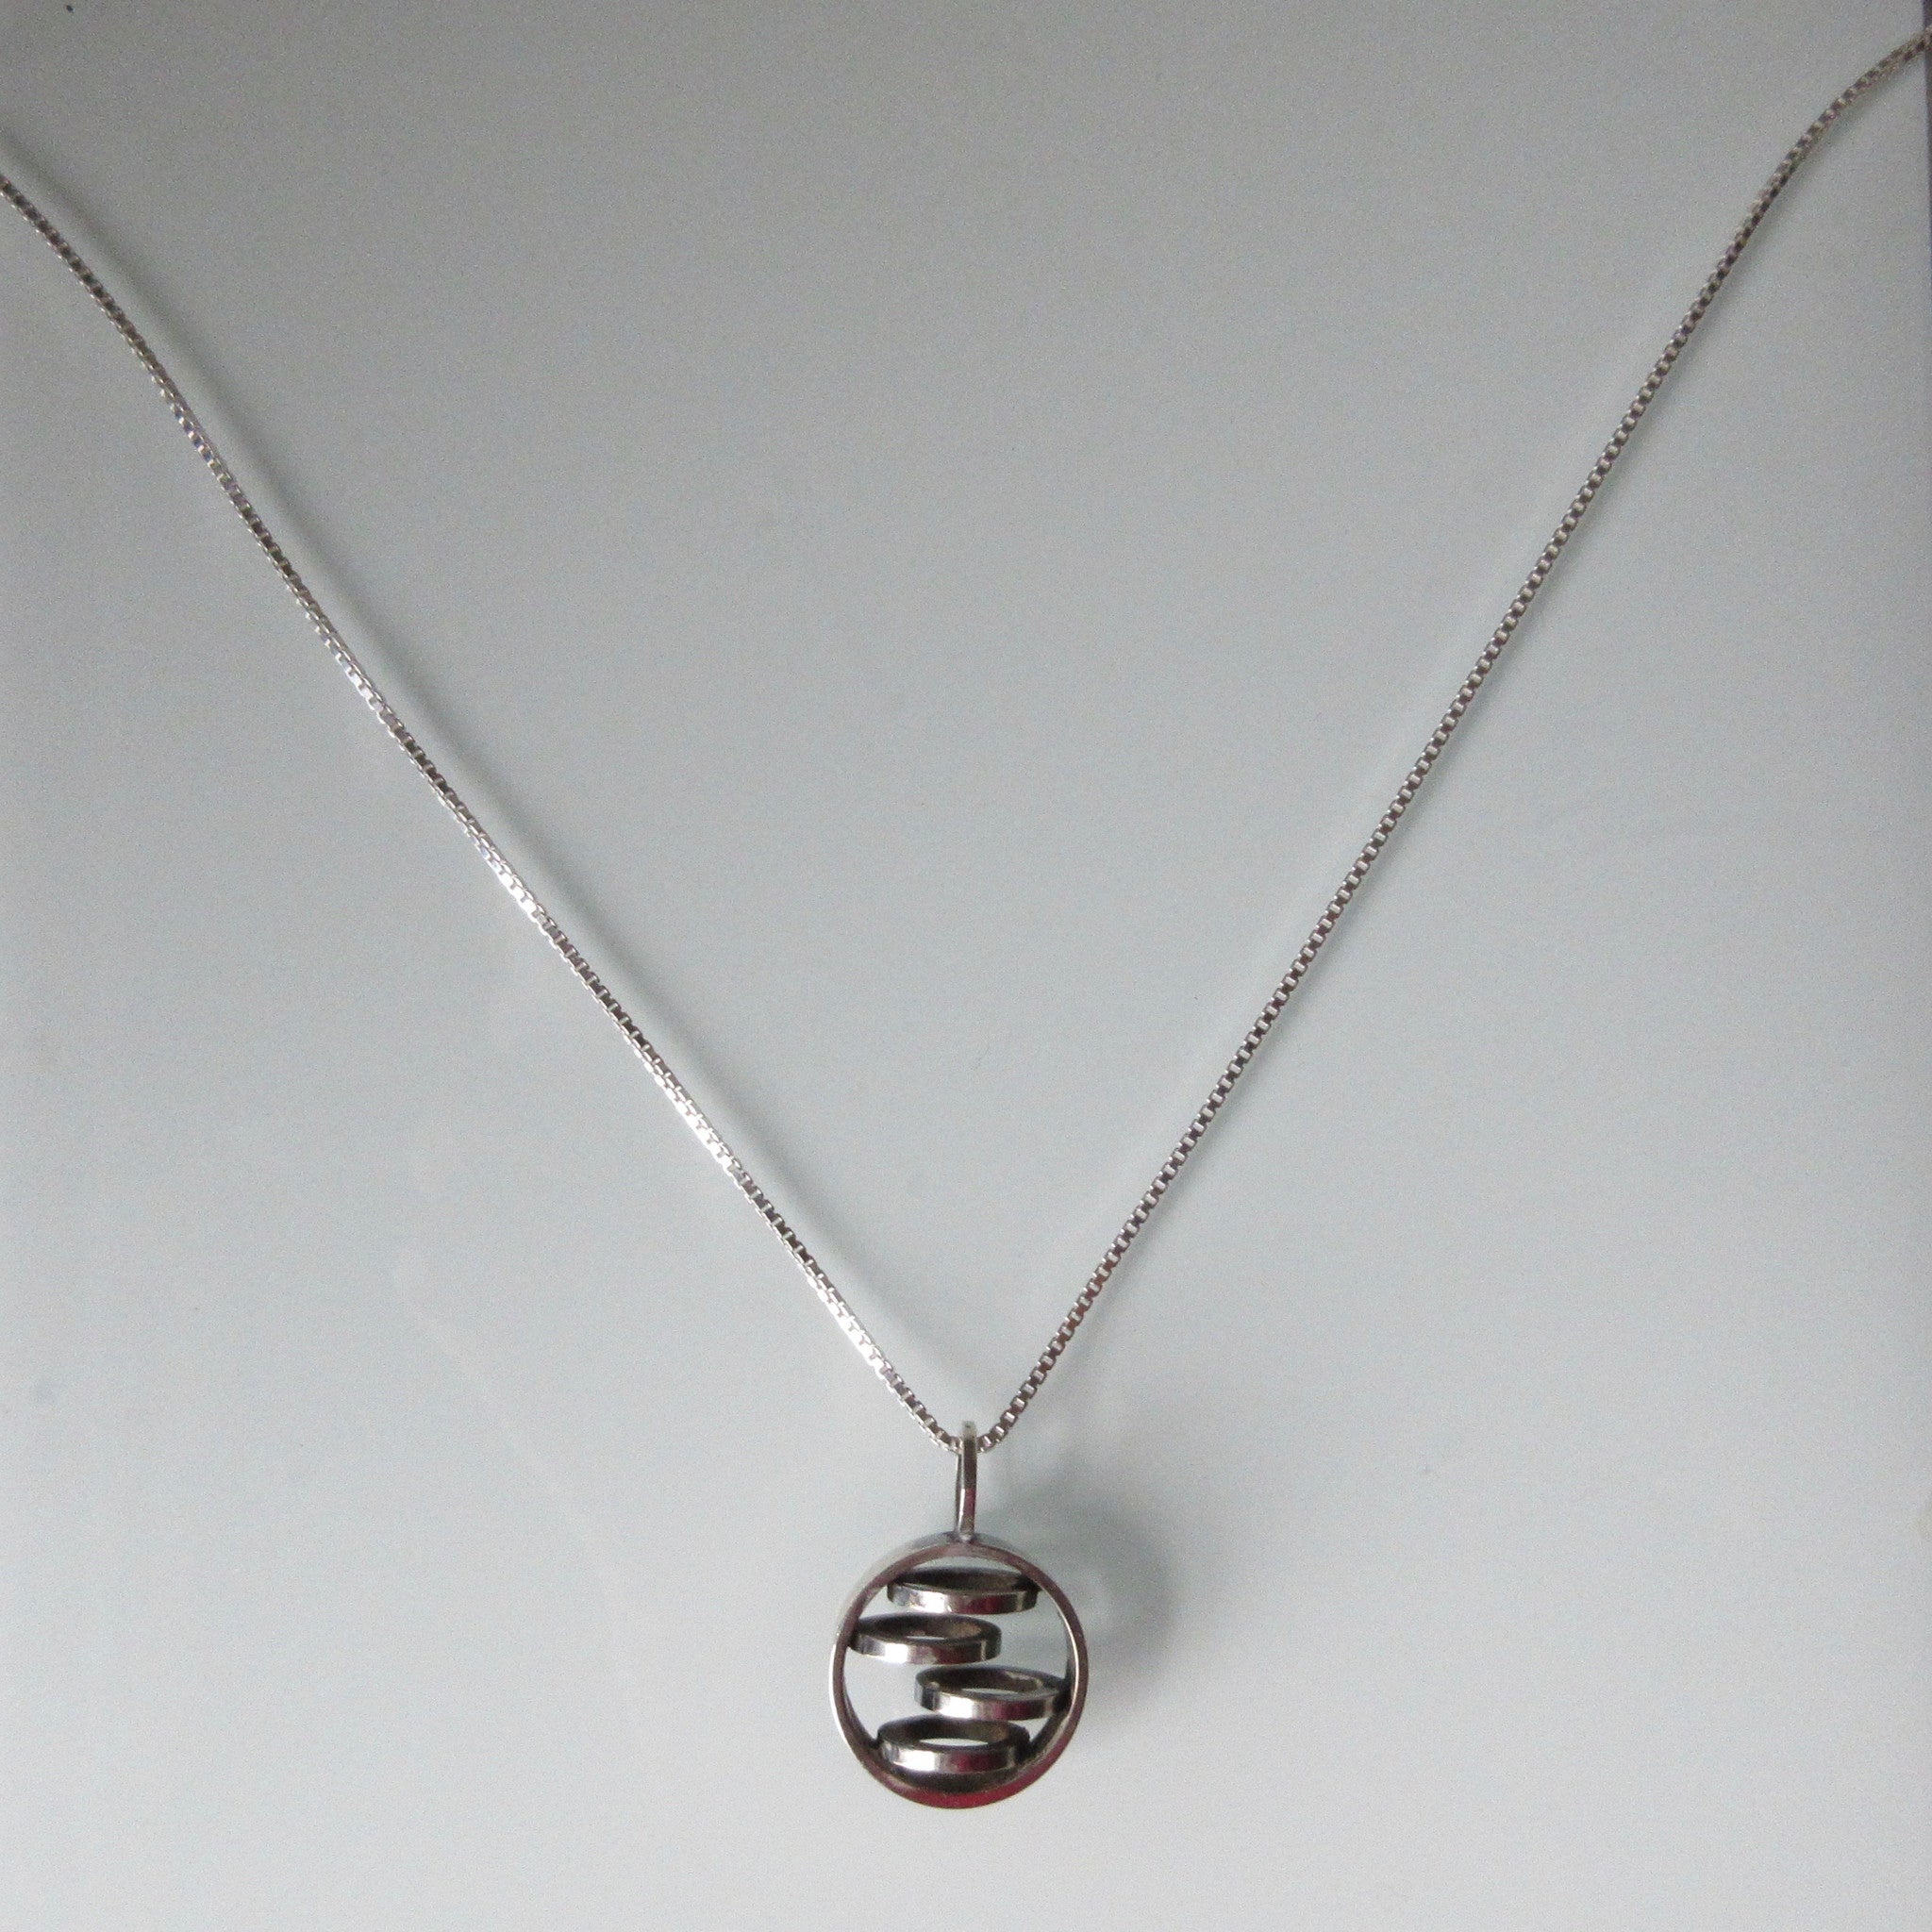 MidCentury Modern Pendant & Sterling Silver Chain 20"